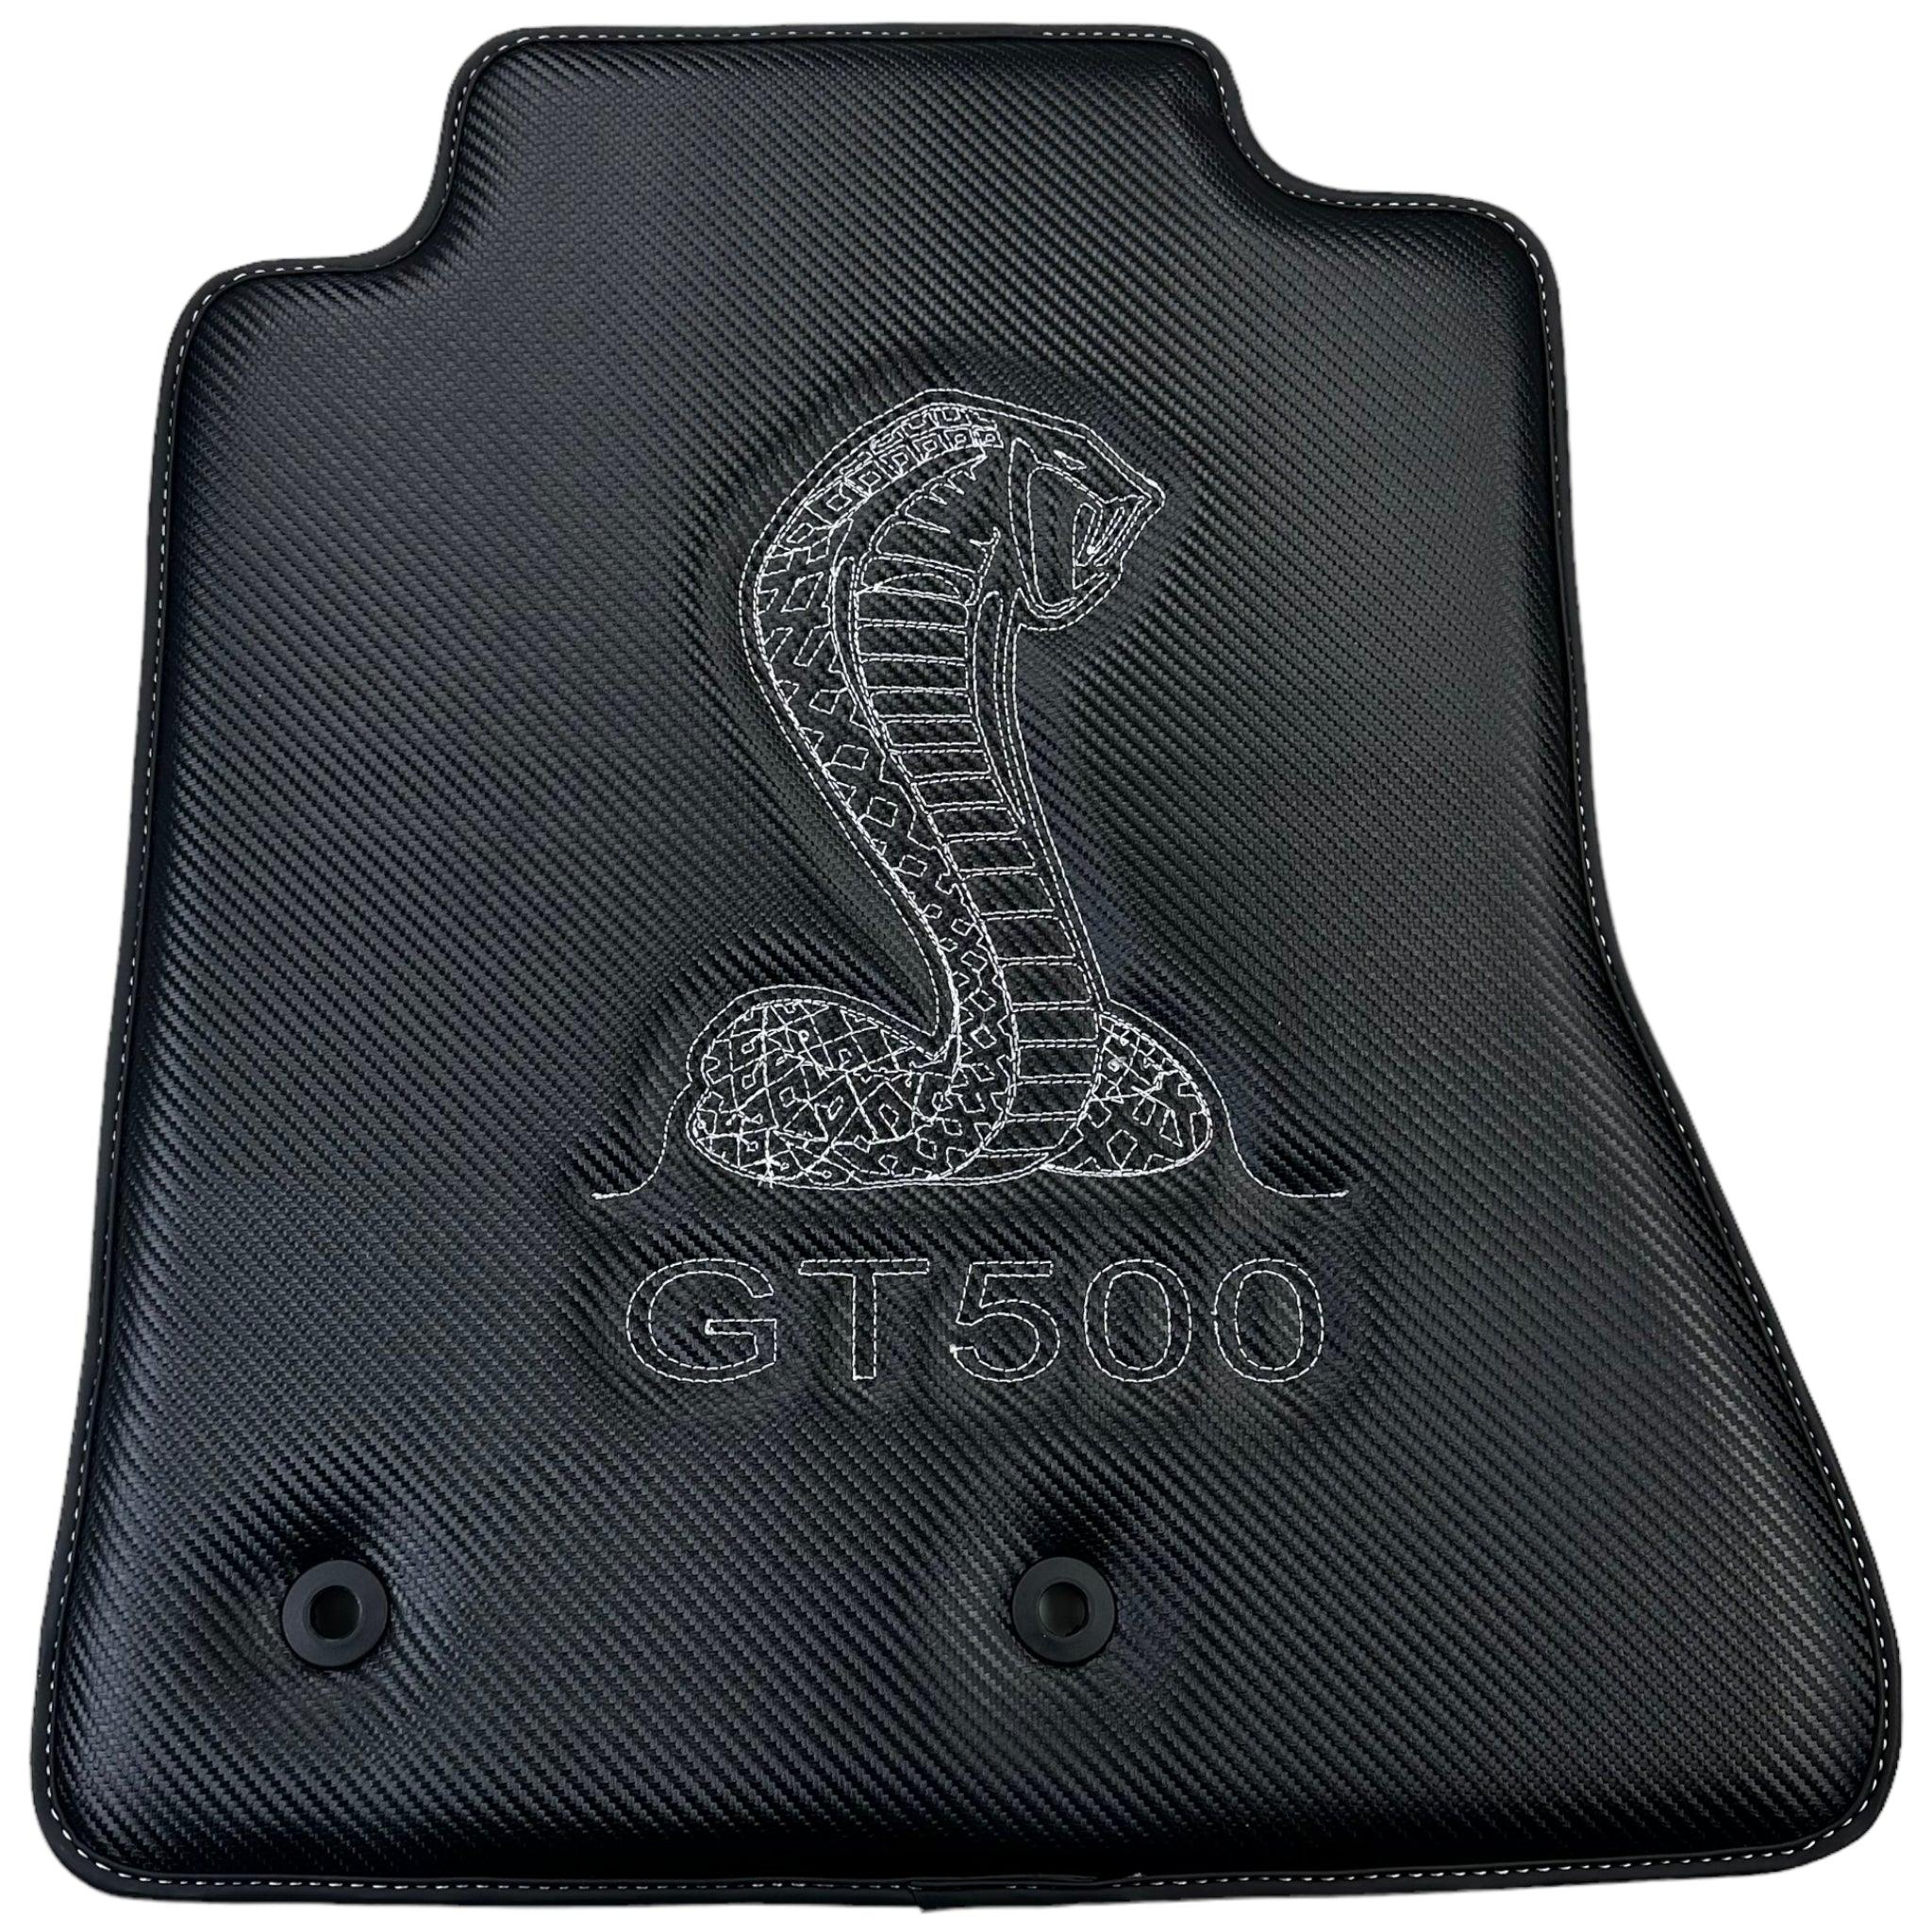 Carbon Fiber Floor Mats for Ford Mustang GT500 Shelby (2015-2021) with Cobra Sewing